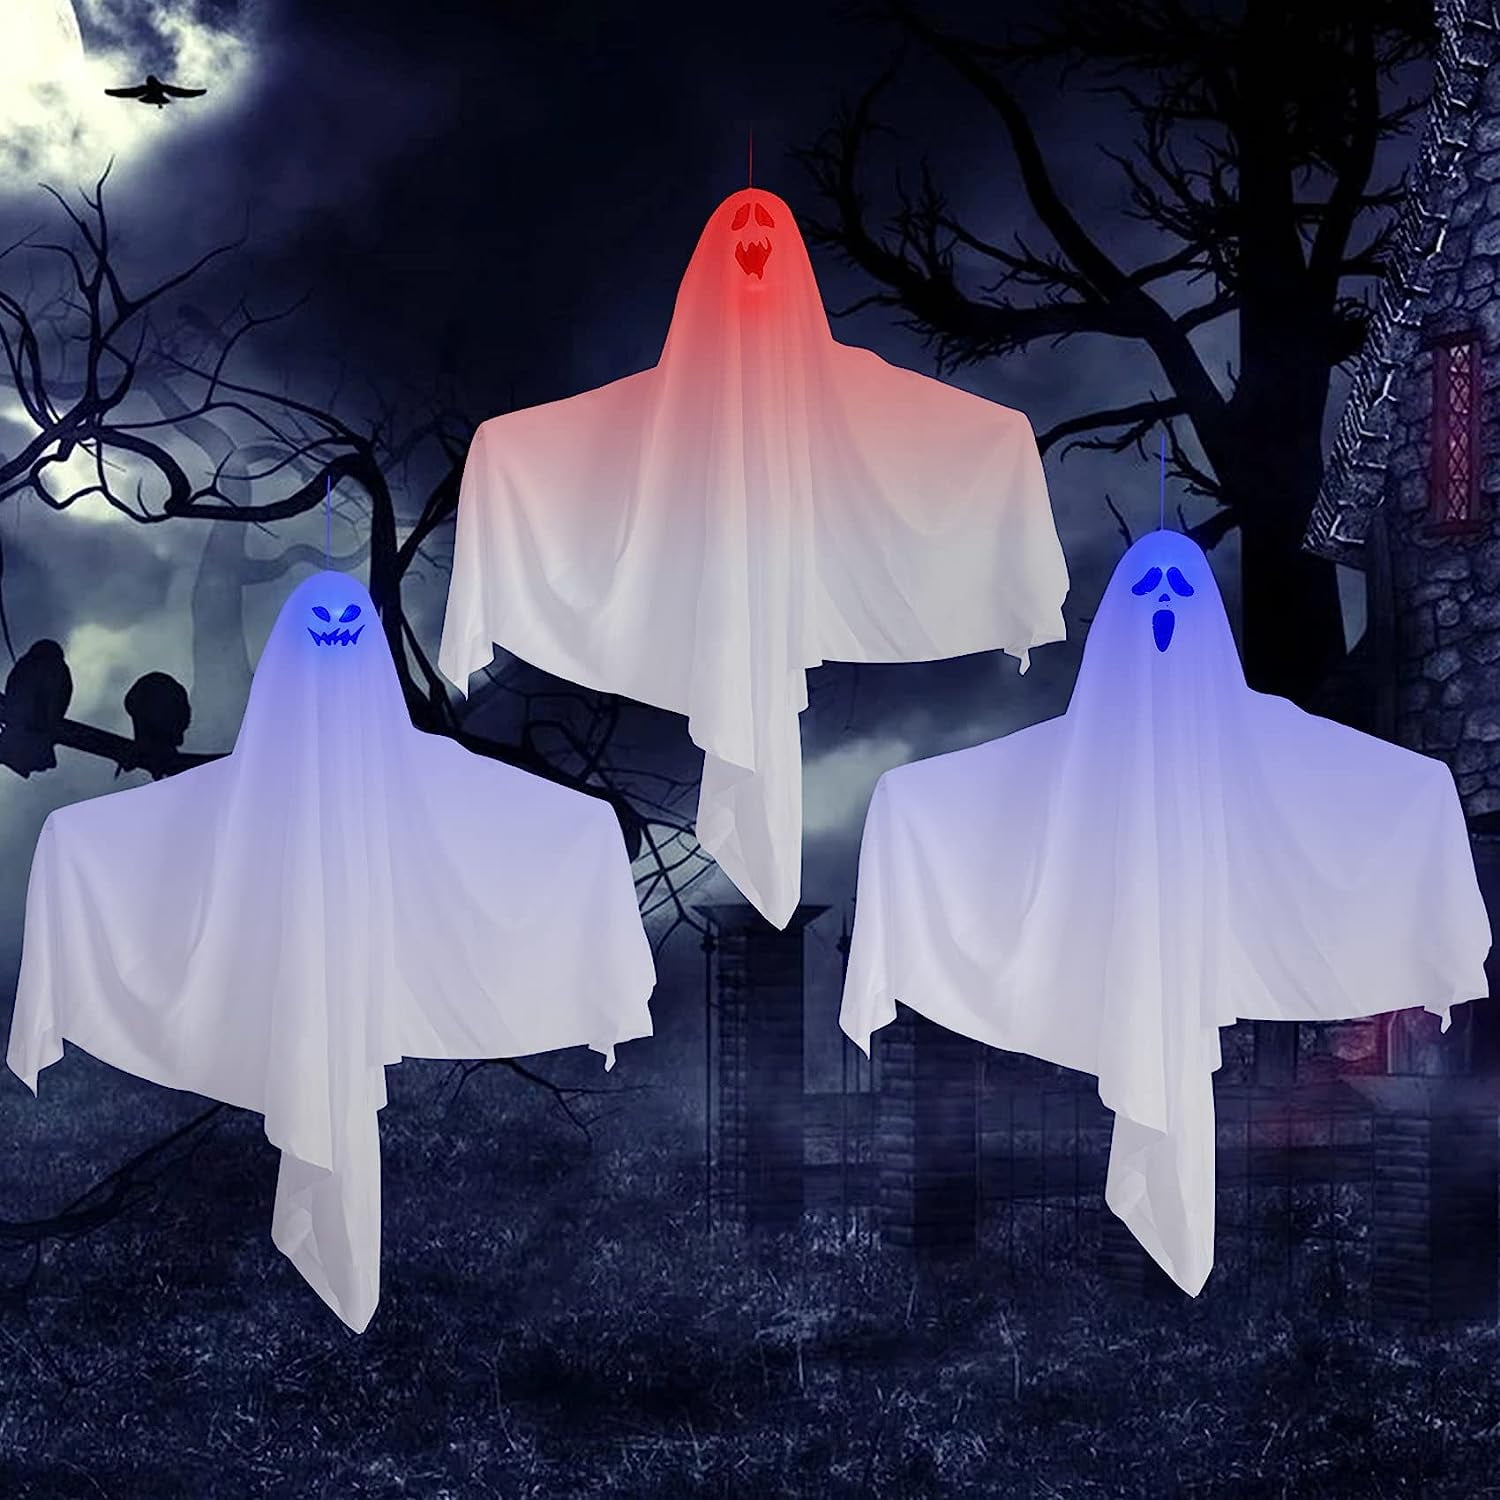 3 Pcs Halloween Hanging Ghosts Decorations Light up Ghost with LED ...